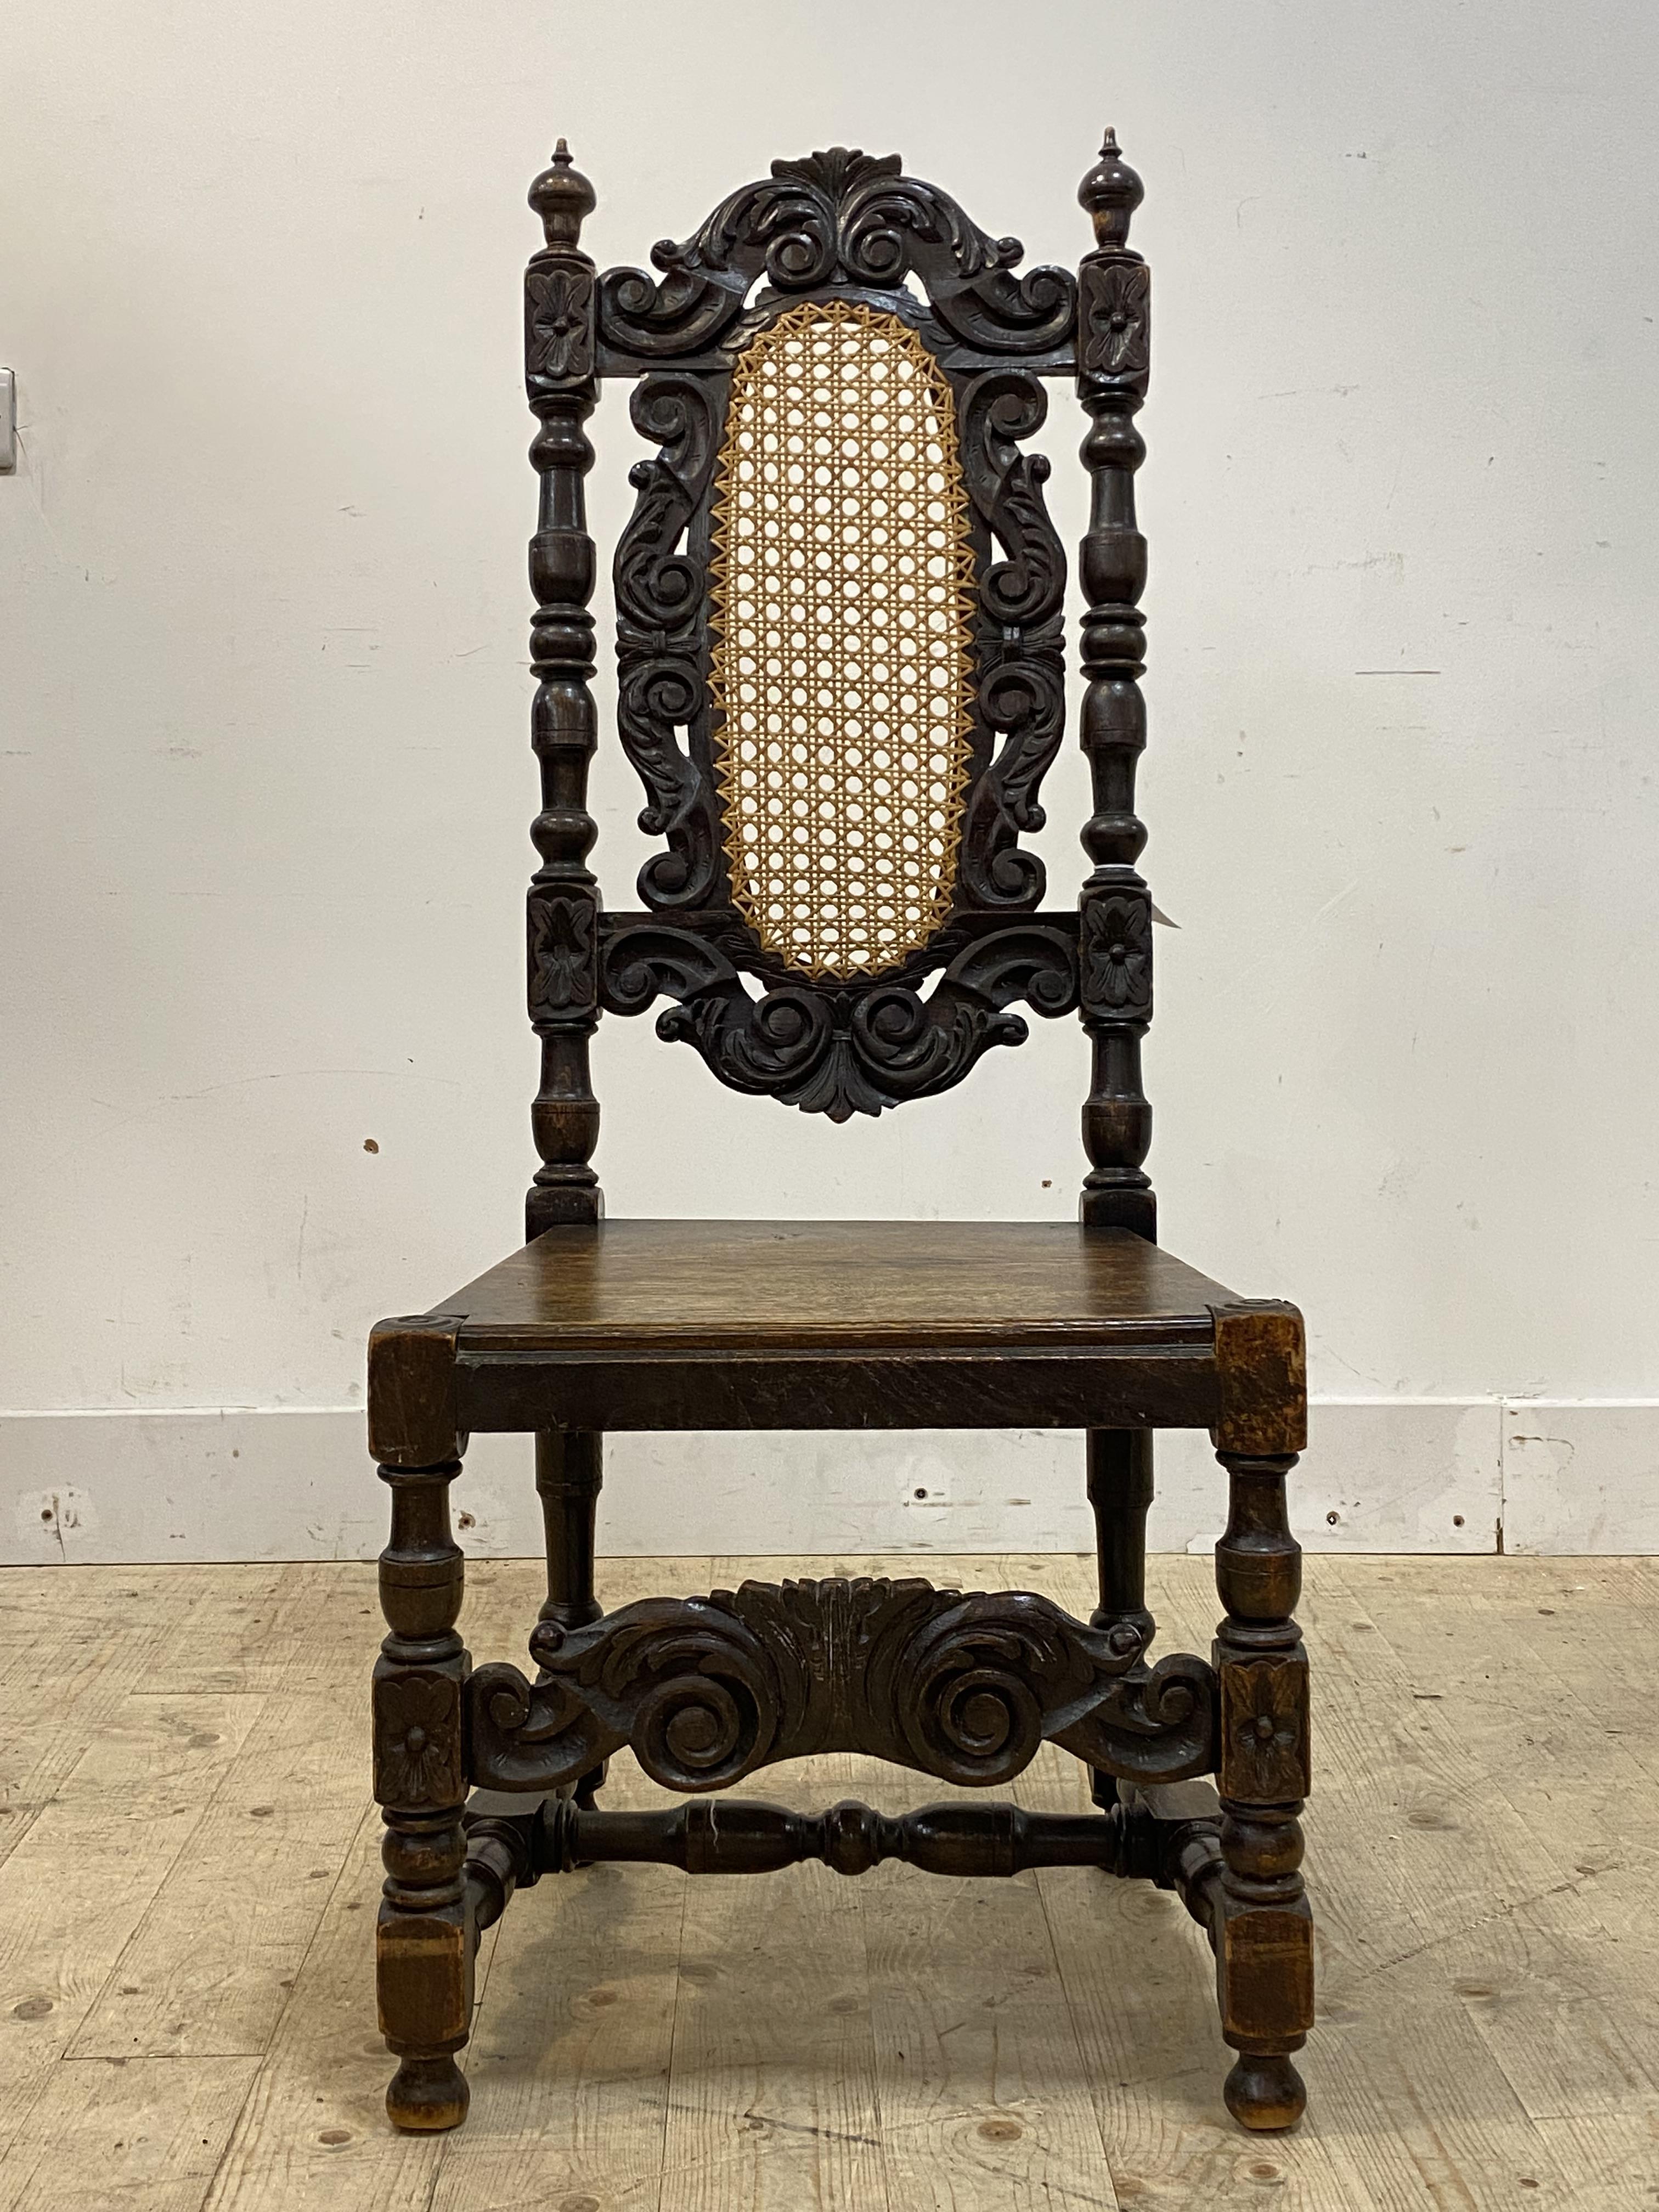 A 19th century stained oak high back chair of Carolean design, with floral carved and cane